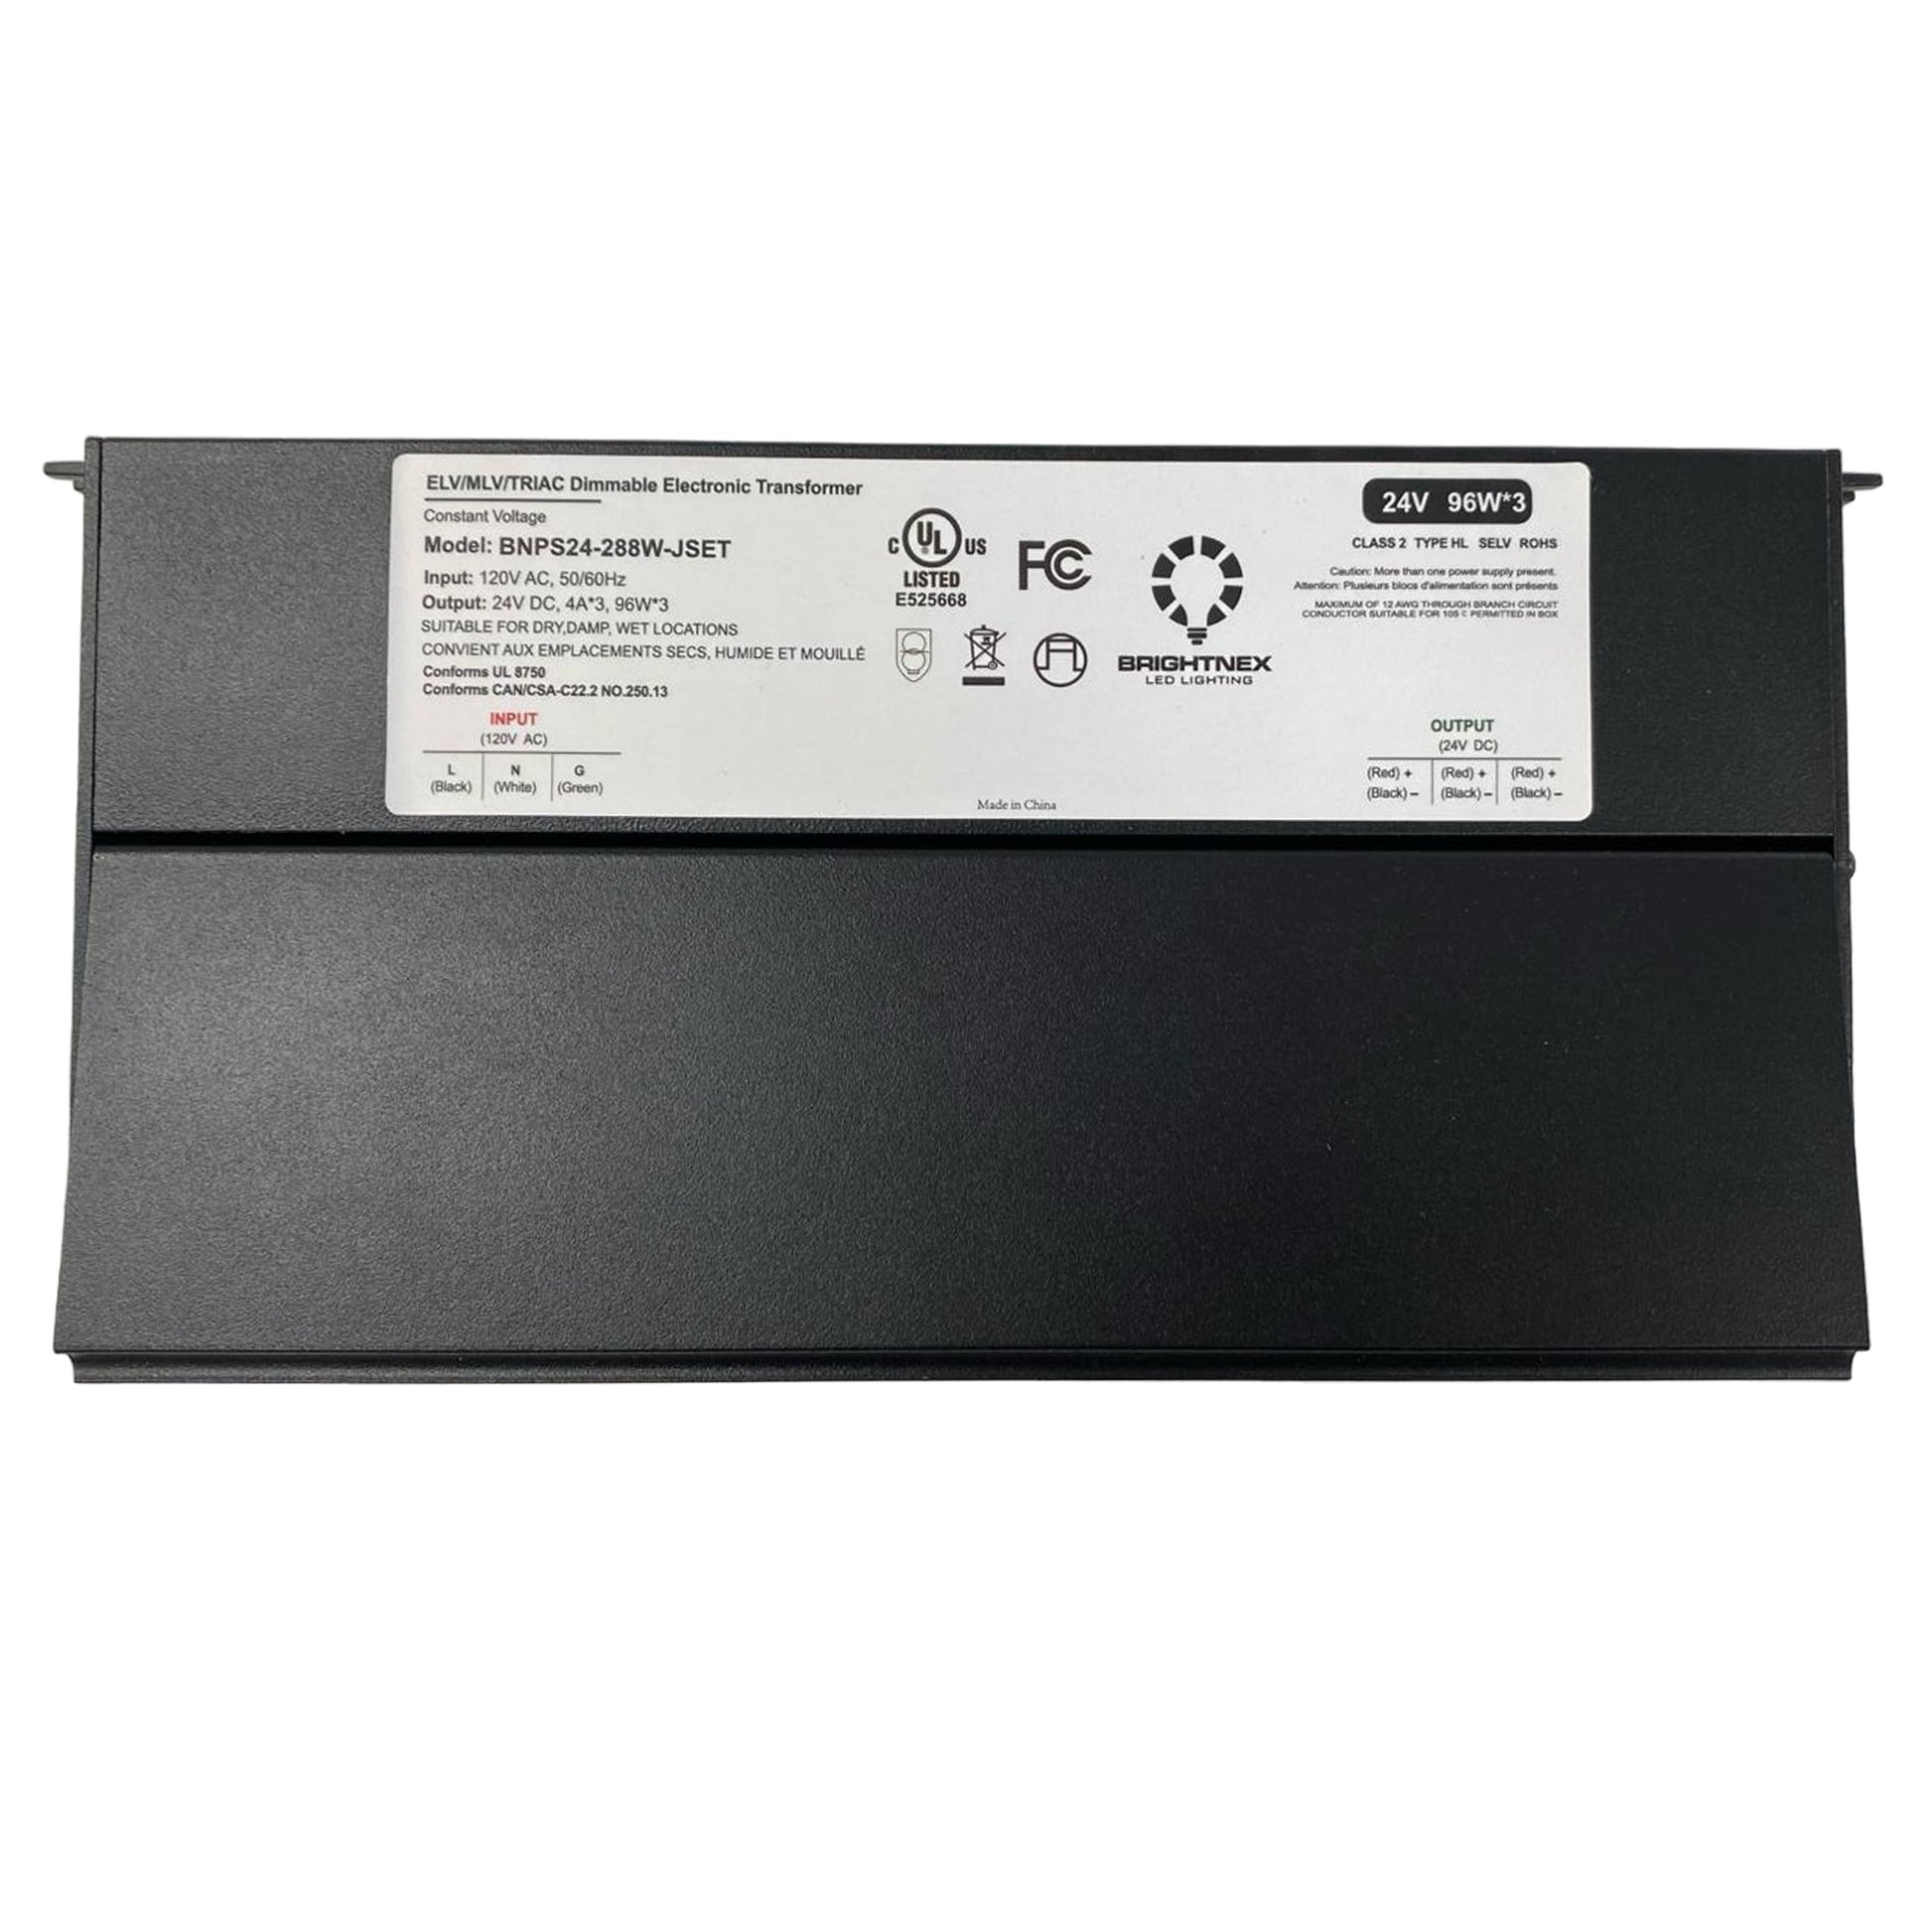 Dimmable LED Driver 24V,288W for Wet, Damp, Dry Locations, Class 2, UL Certified (Dimmable LED Transformer)